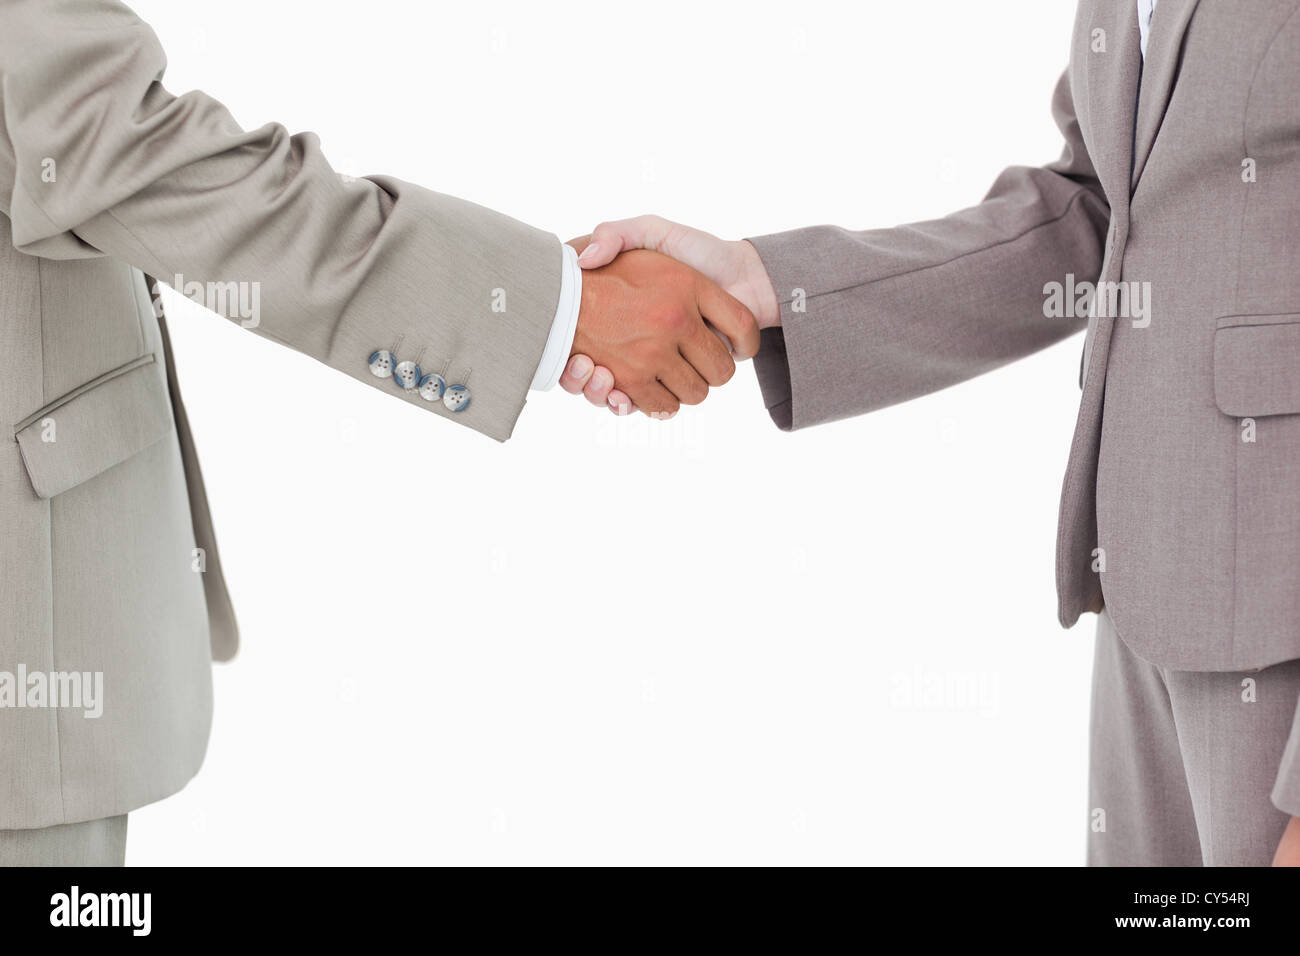 Side view of shaking hands Stock Photo